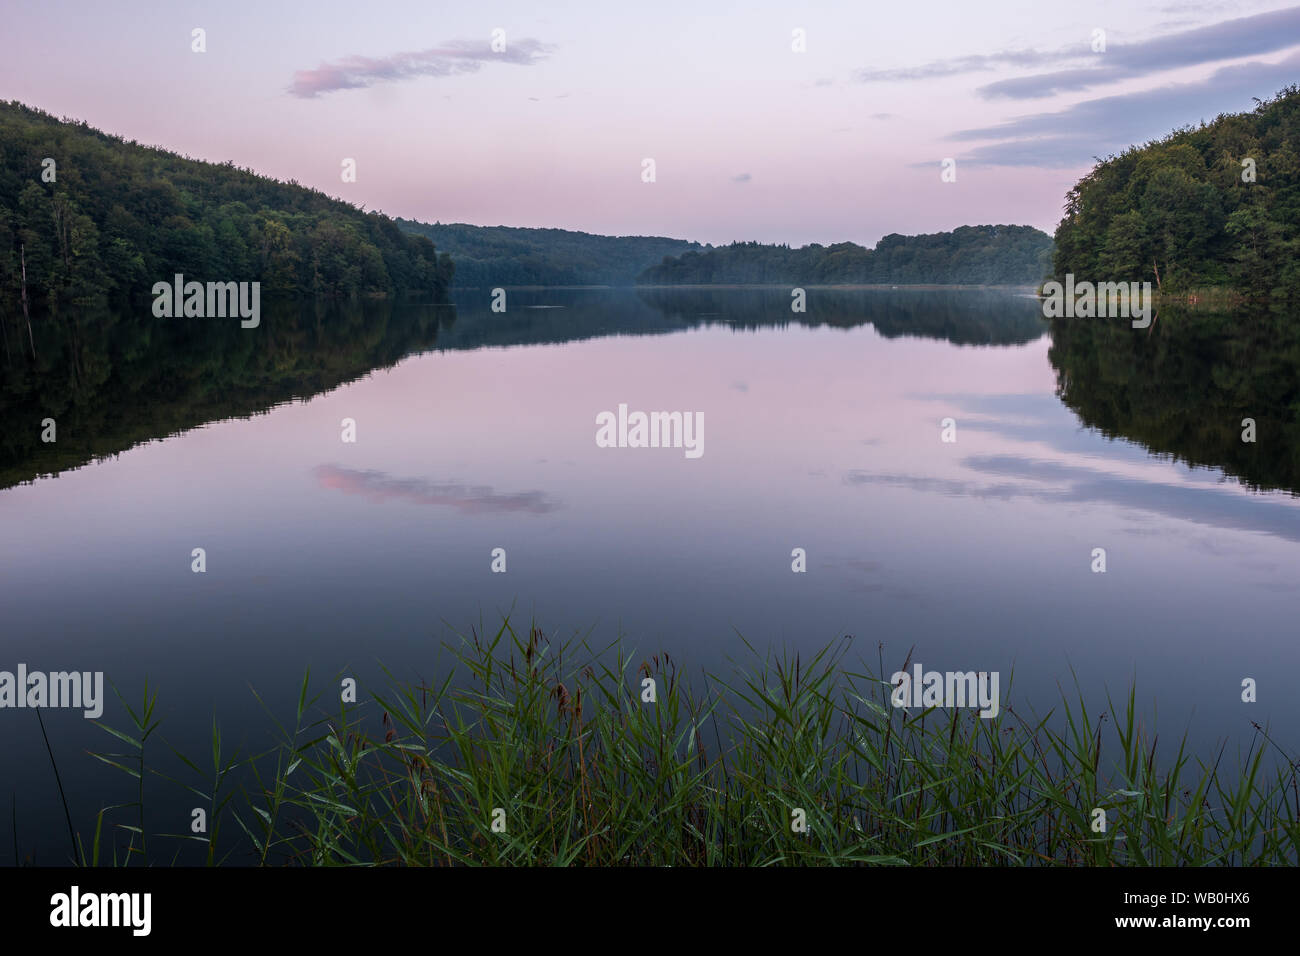 Peaceful evening at the lake Ukleisee in the middle of forest with reed in foreground, Eutin, Schleswig-Holstein Stock Photo